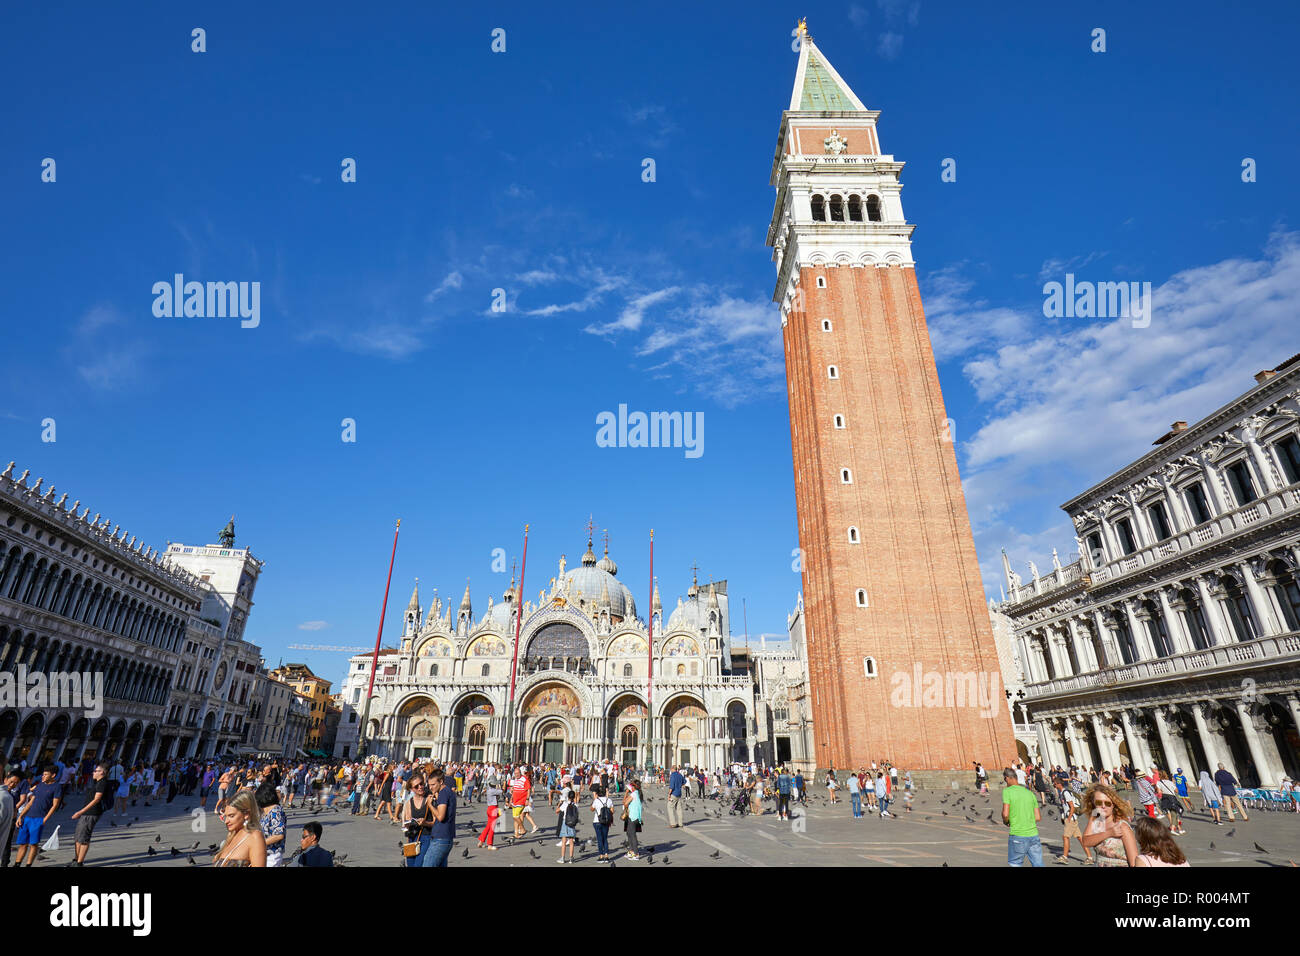 VENICE, ITALY - AUGUST 12, 2017: San Marco square, basilica facade, bell tower and crowd of people and tourists, blue sky in a sunny summer day in Ita Stock Photo